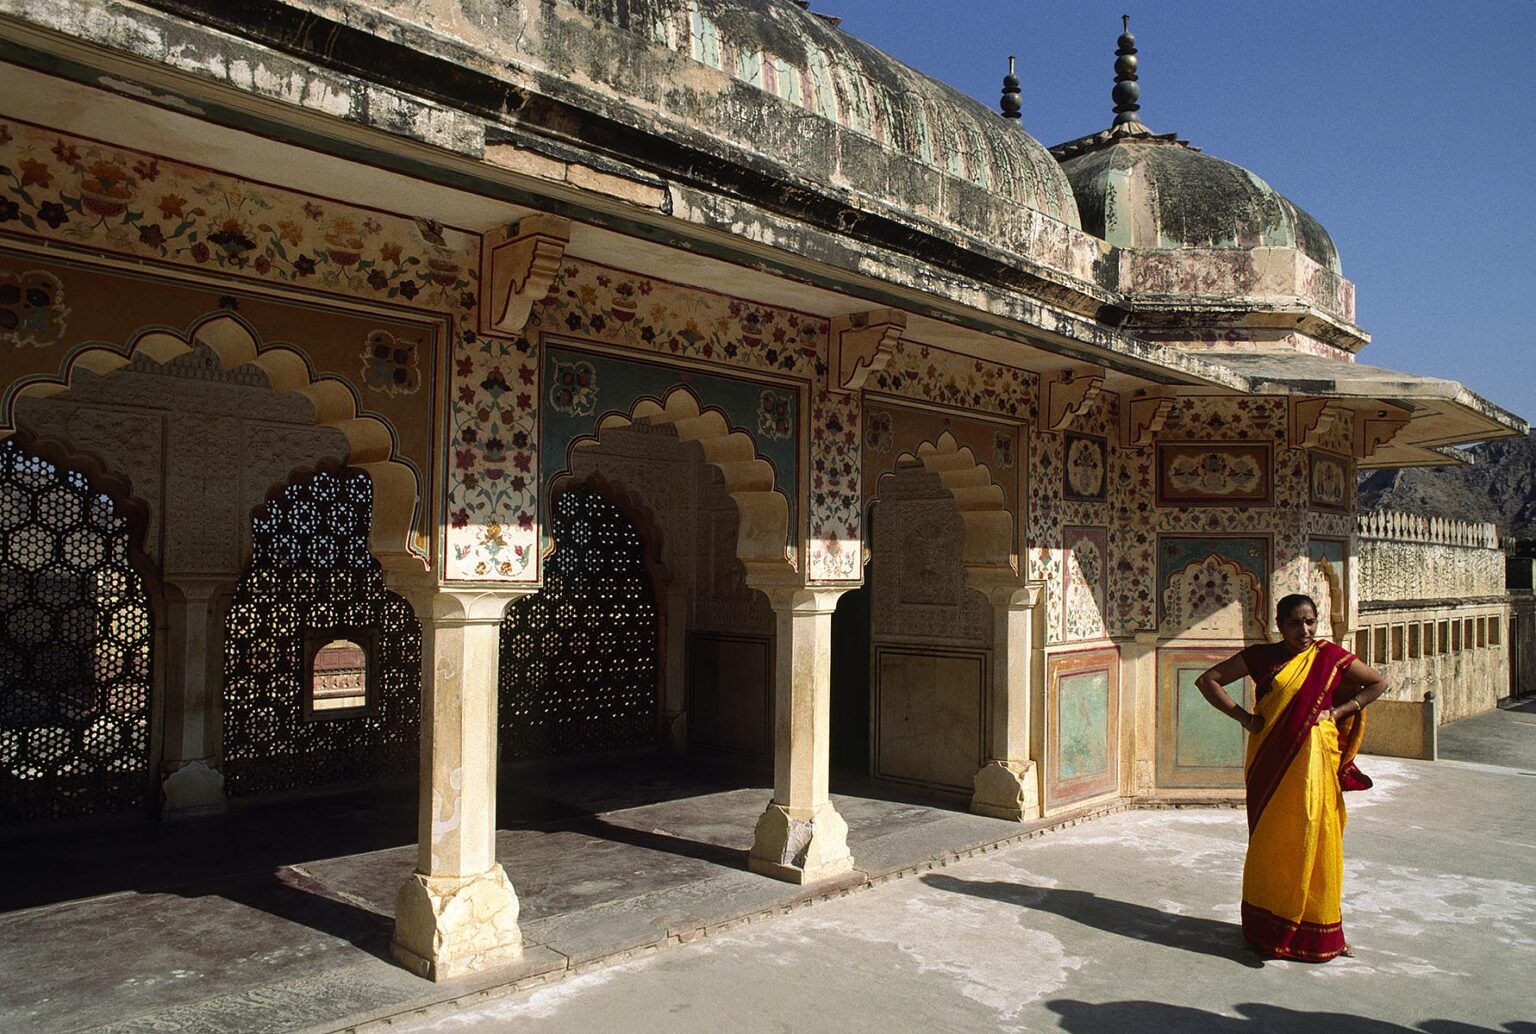 WOMAN wearing a SARI next to WALKWAY with FLORAL PATTERNS on the walls of the AMBER FORT near JAIPUR - RAJASTHAN, INDIA